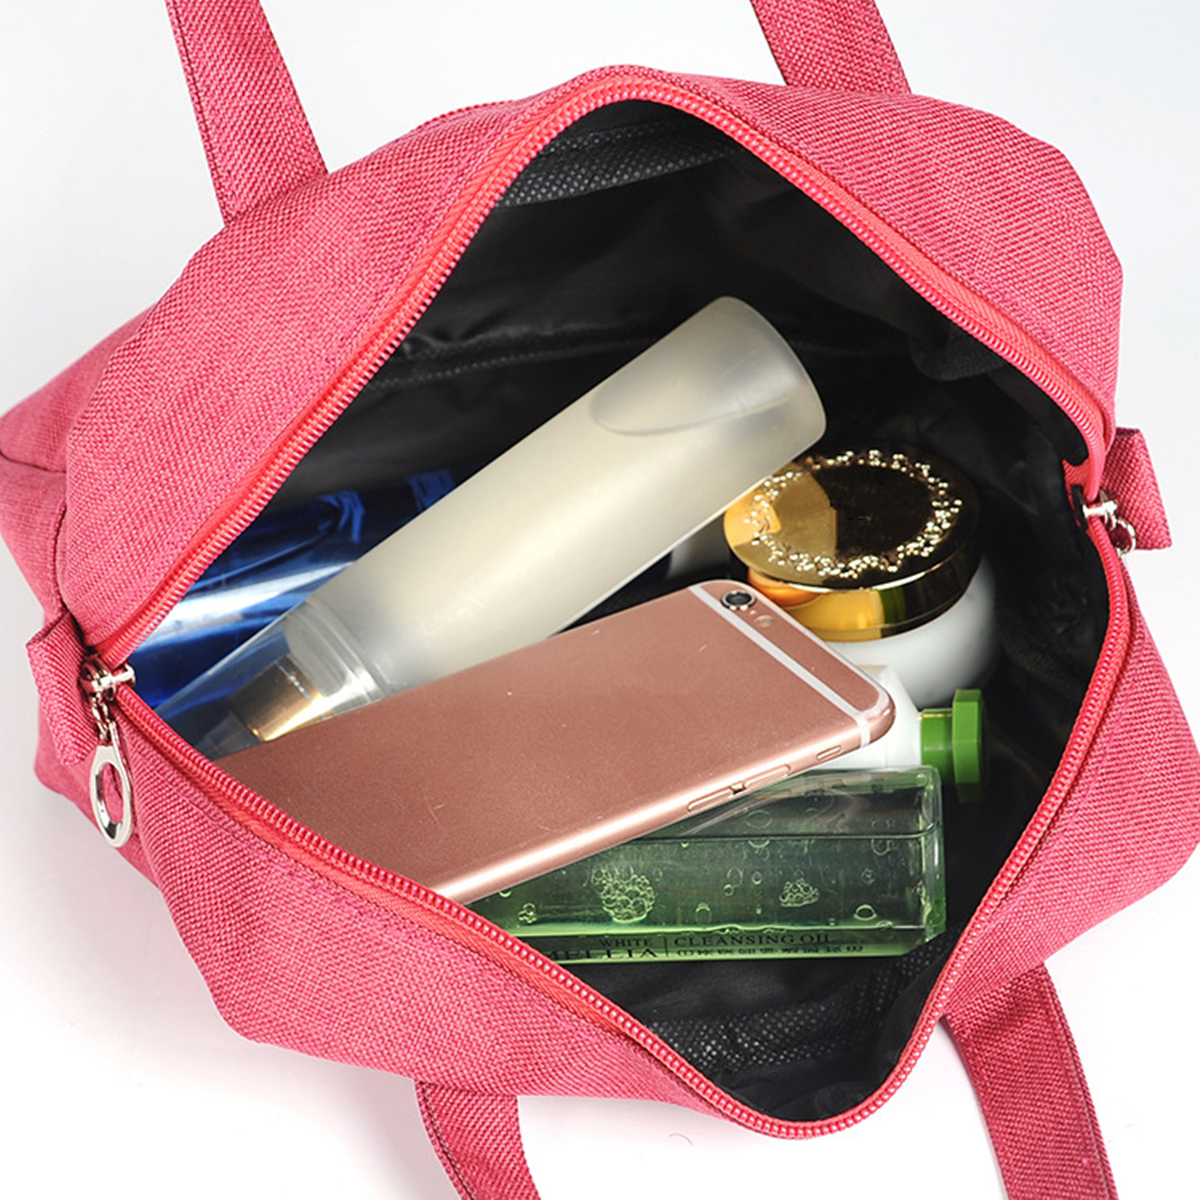 IPReetrade-Travel-Cosmetic-Makeup-Bag-Toiletry-Case-Wash-Organizer-Storage-Hanging-Pouch-1173679-8